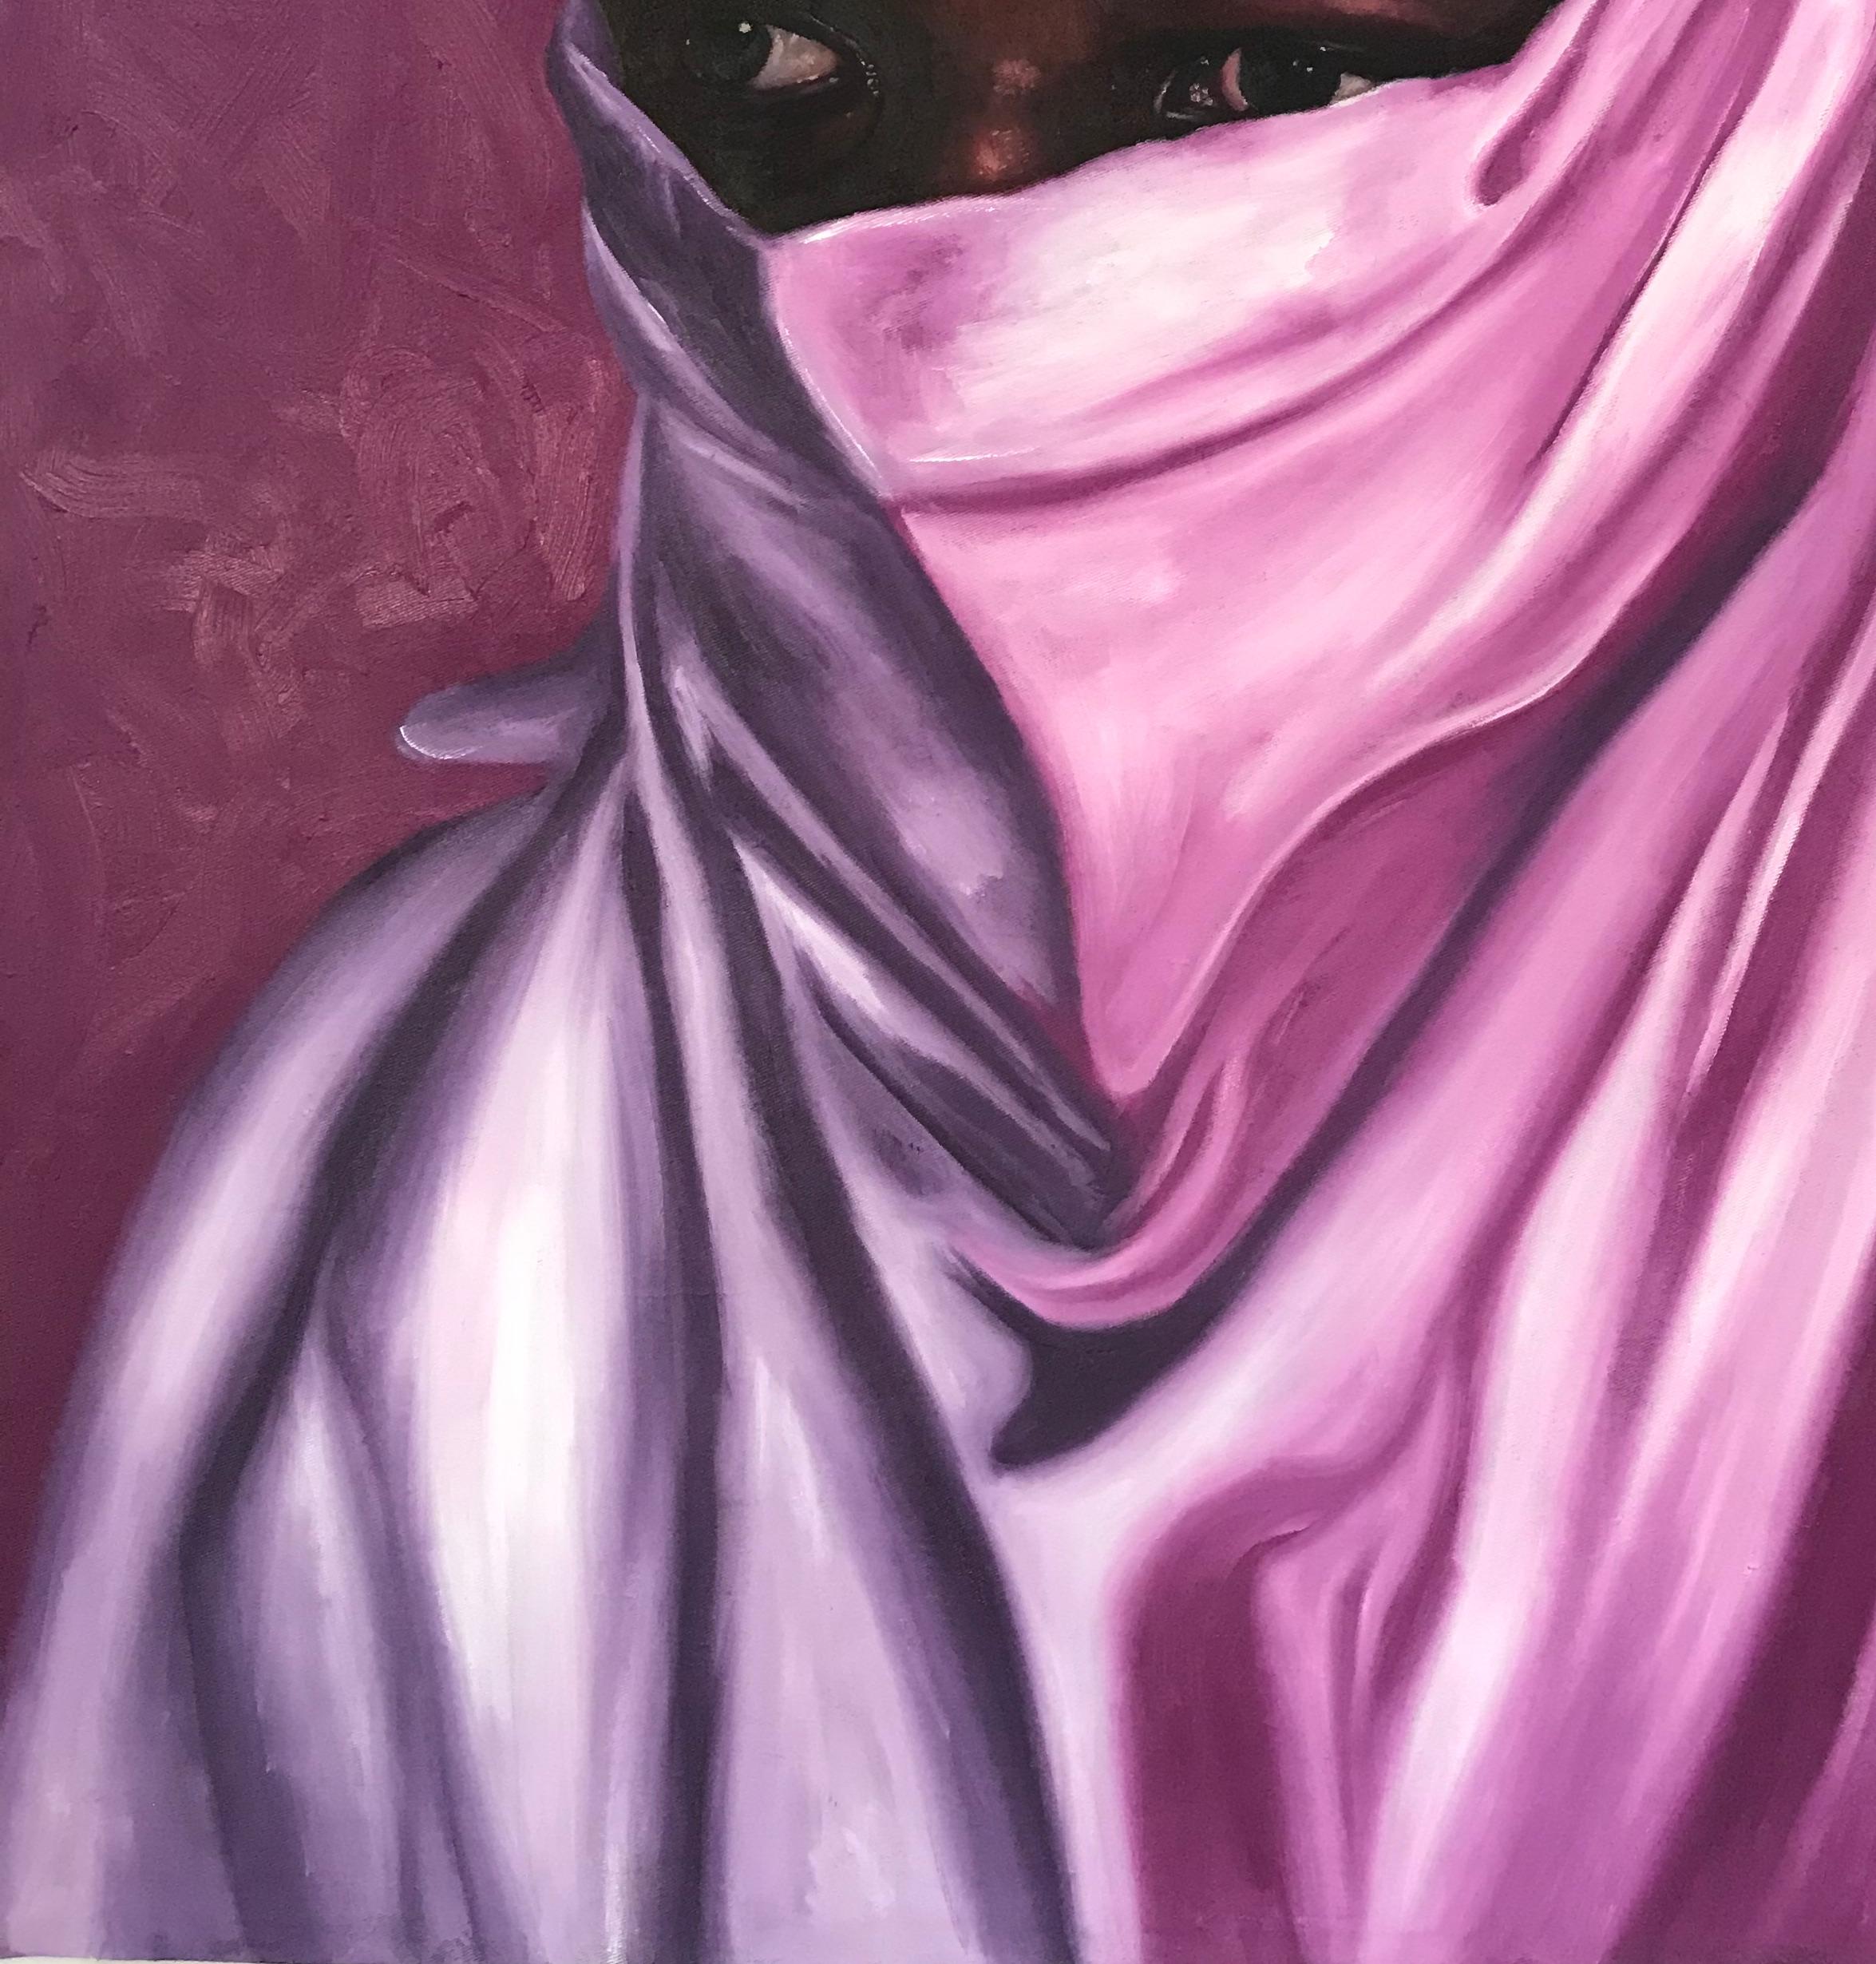 The Purple Veil: A Portrait of Youth and Mystery - Contemporary Painting by Bakare Abubakri-sideeq Babatunde